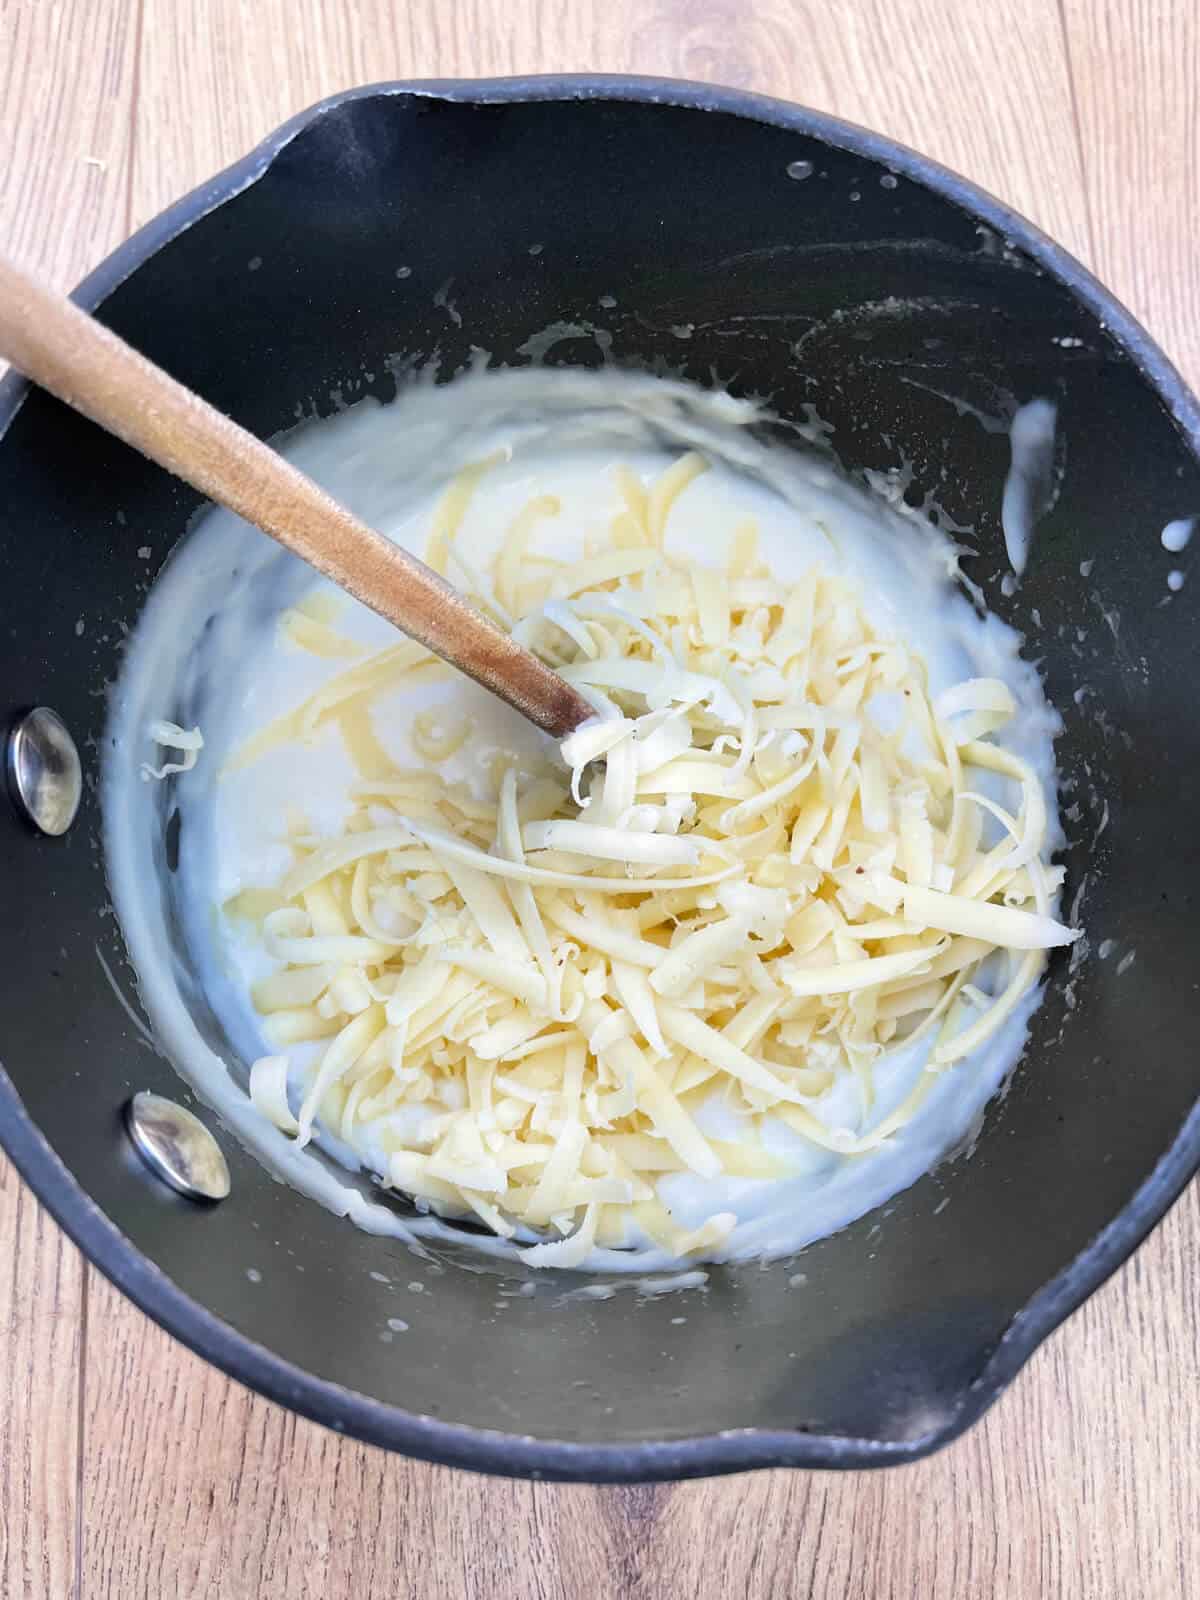 White sauce with grated cheese added, in saucepan.